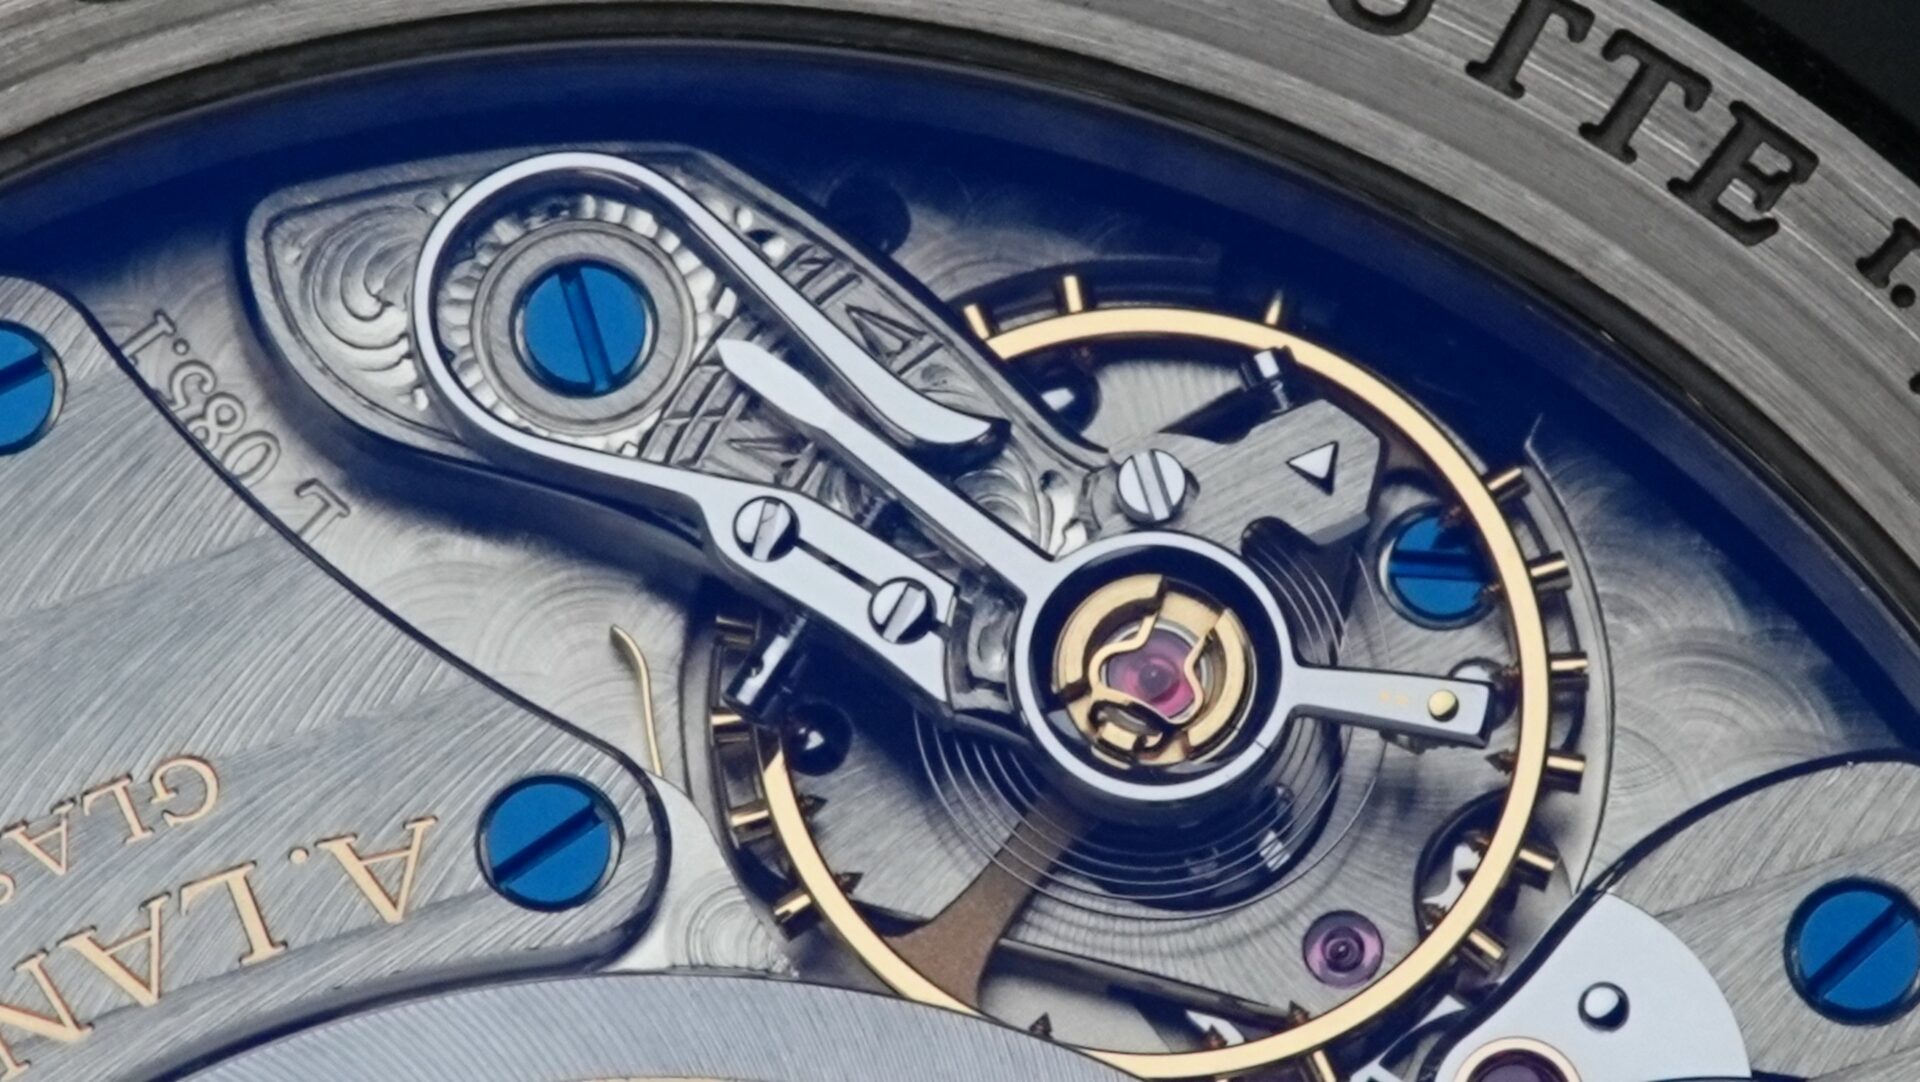 Close up image of the movement inside the A. Lange & Söhne Saxonia Annual Calendar watch.